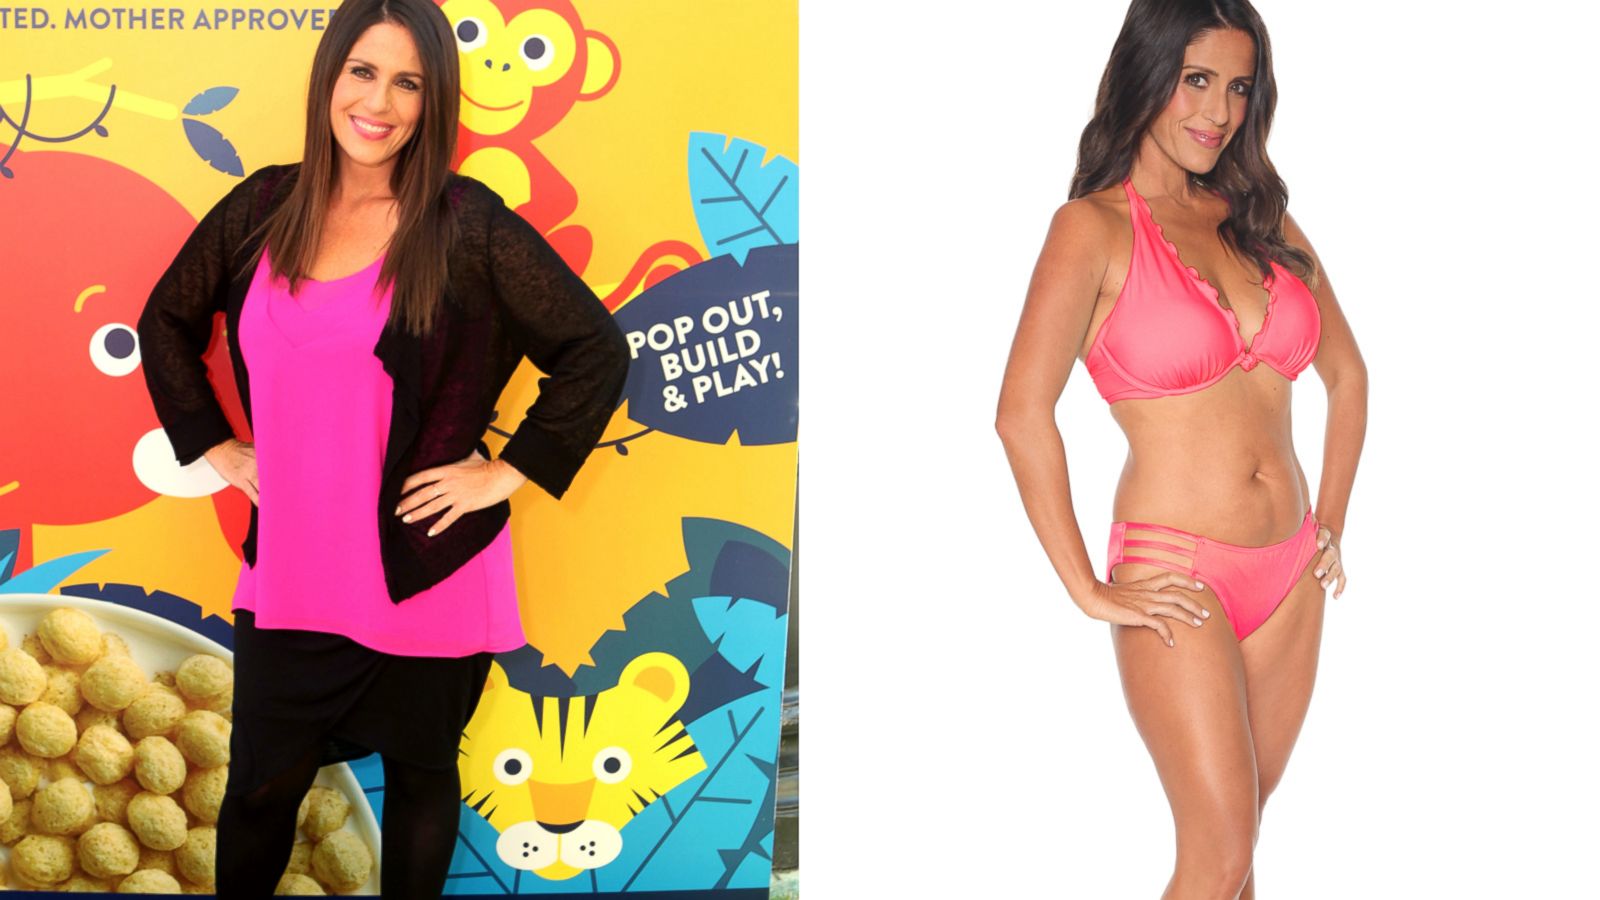 How Soleil Moon Frye Lost 40 Pounds - ABC News